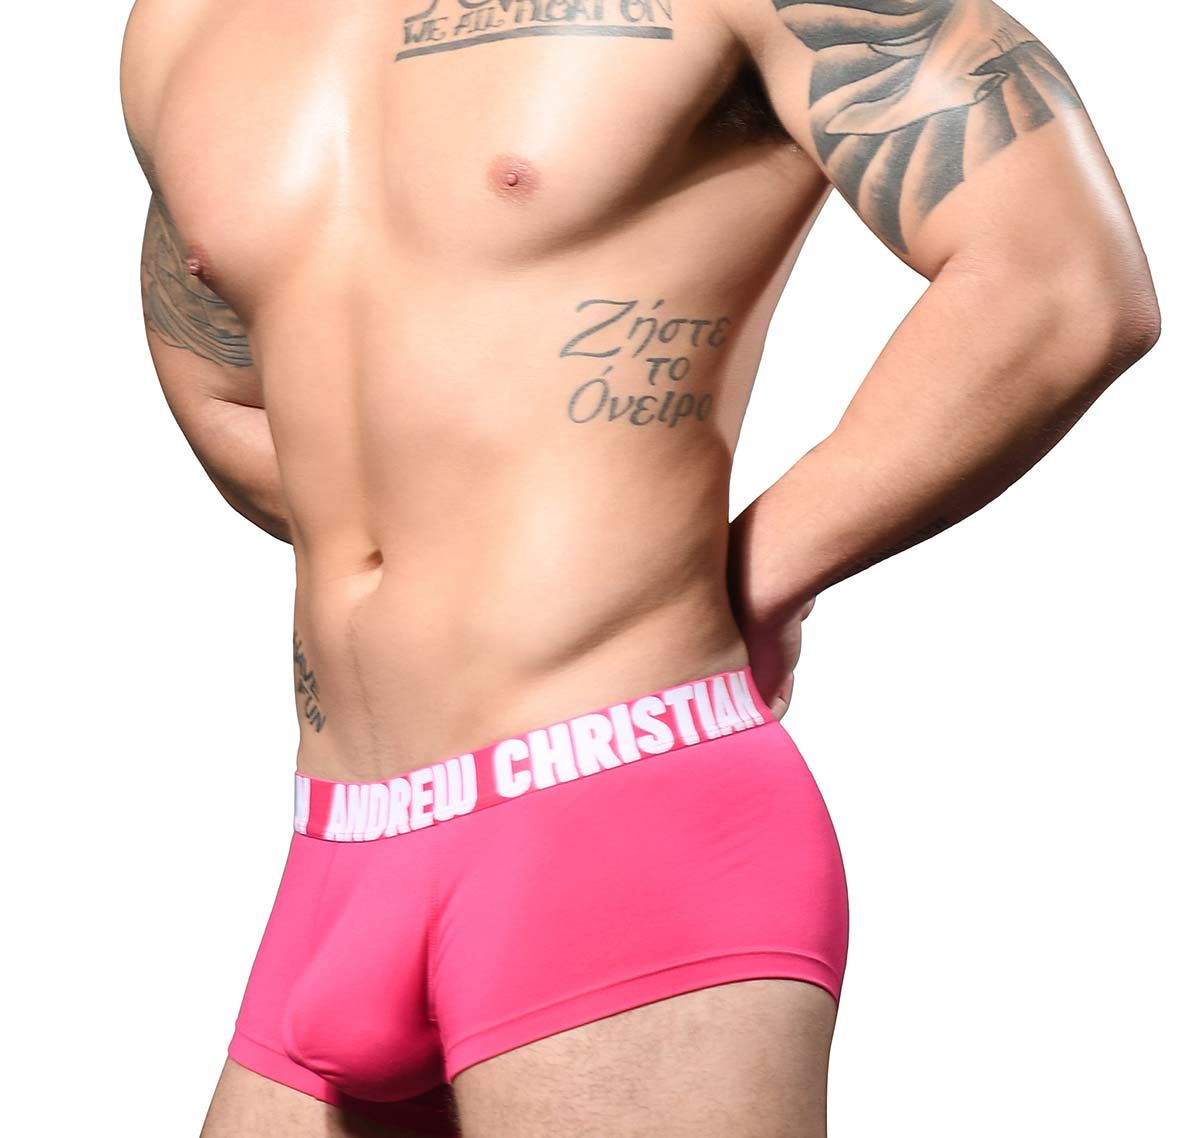 Andrew Christian Boxers SLOW FASHION ECO COLLECTIVE BOXER w/Almost Naked 93202, pink